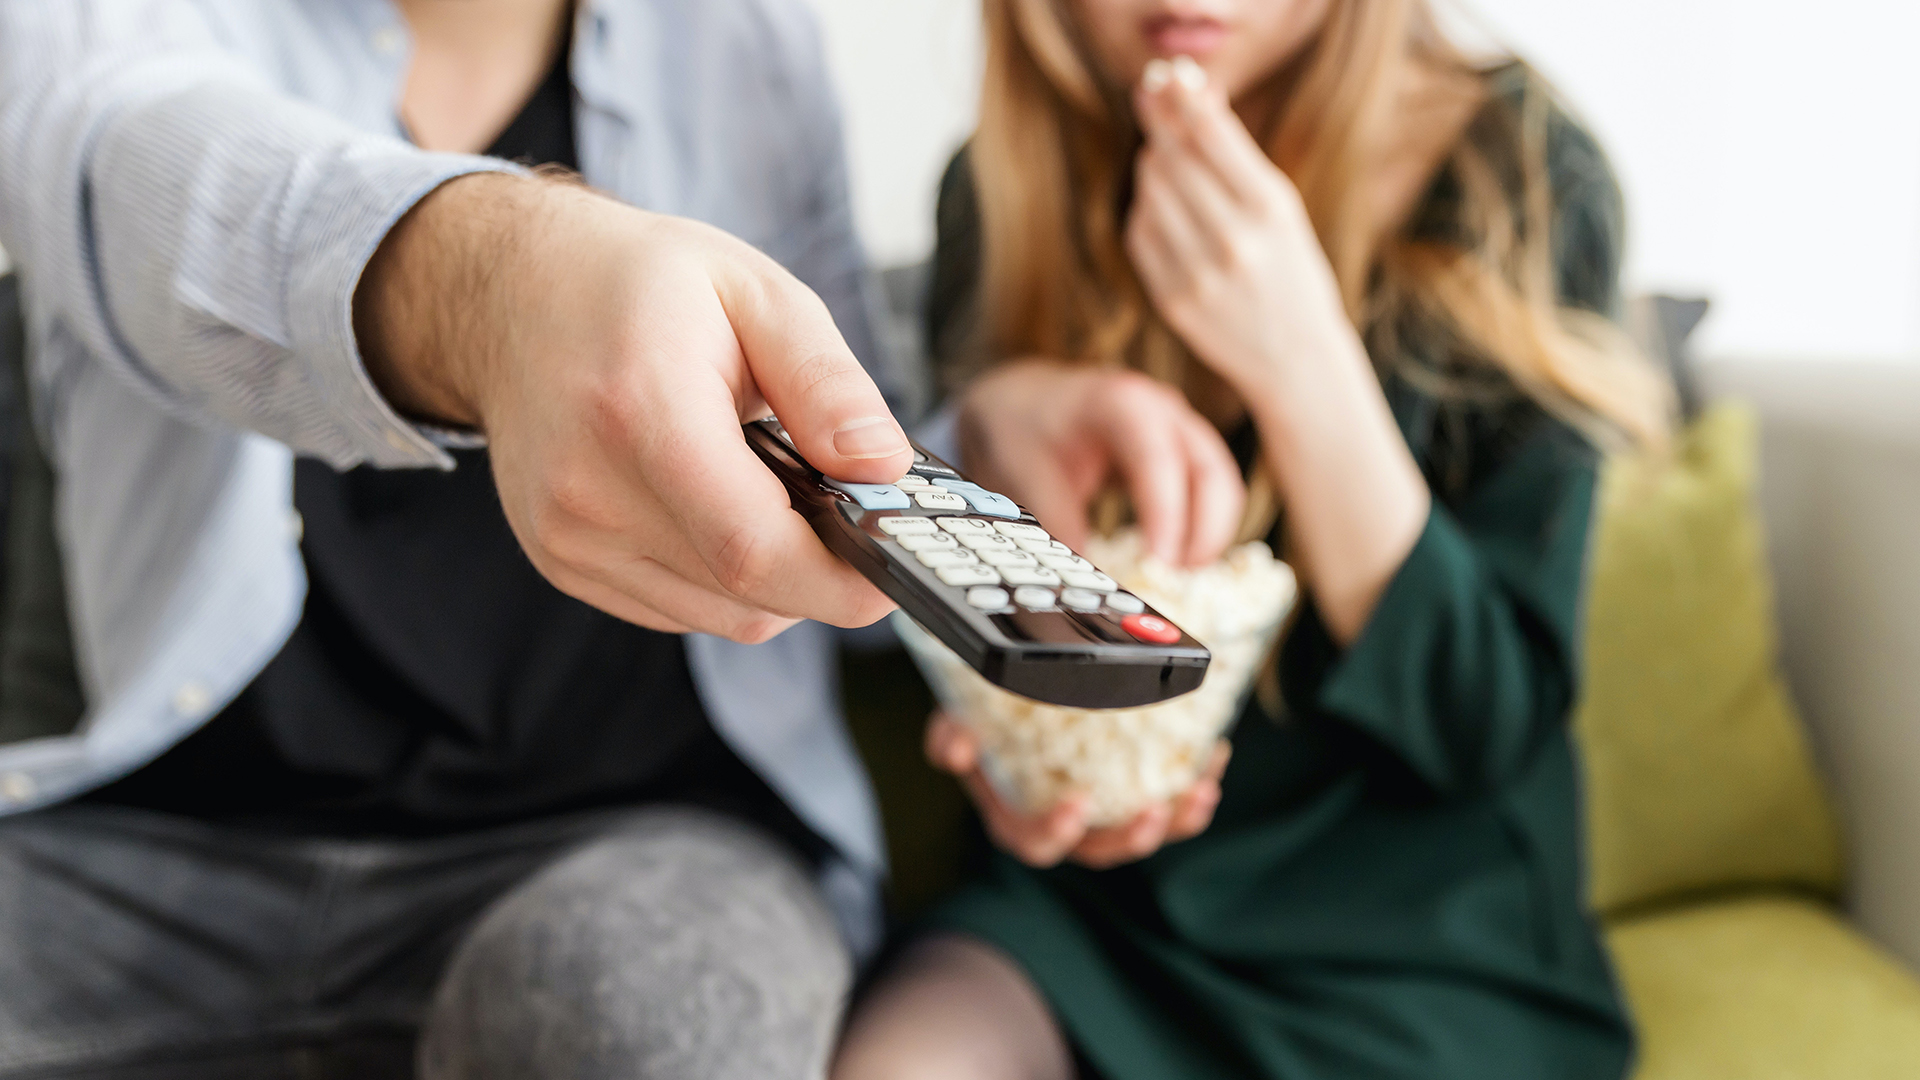 A photo of a man and a woman enjoying popcorn from the neck down while turning the TV channel on the remote